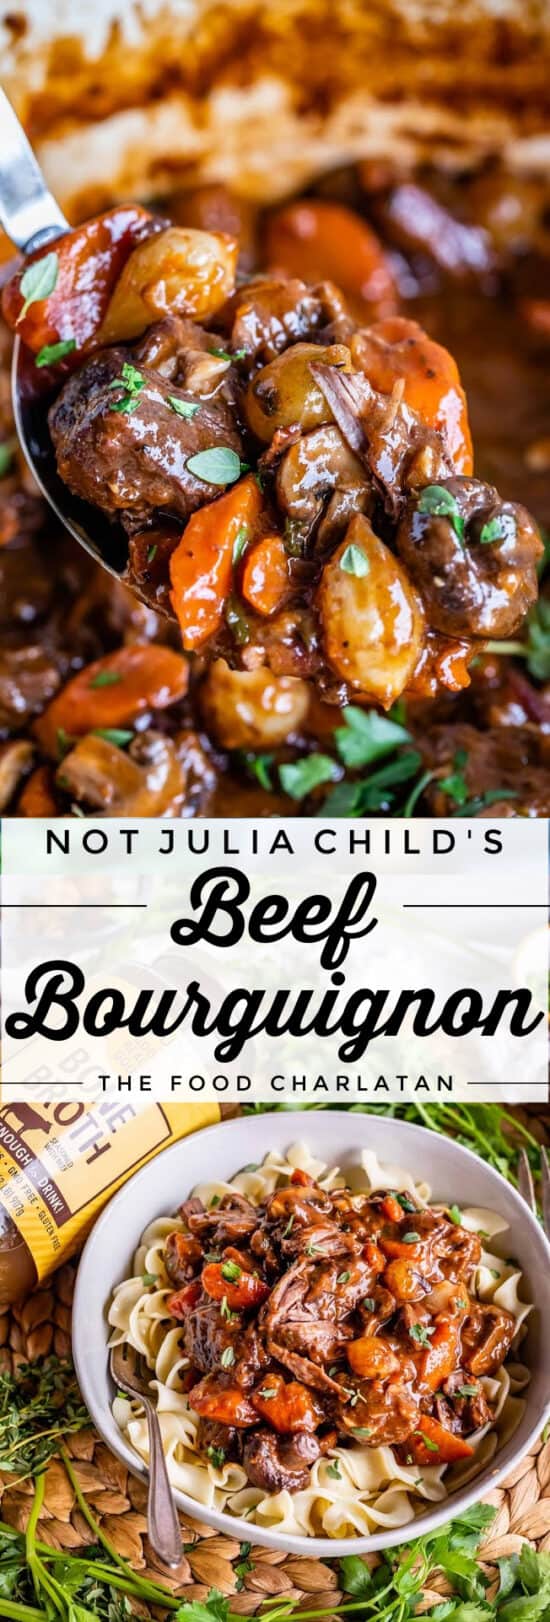 beef bourguignon recipe on a spoon and on a plate with egg noodles